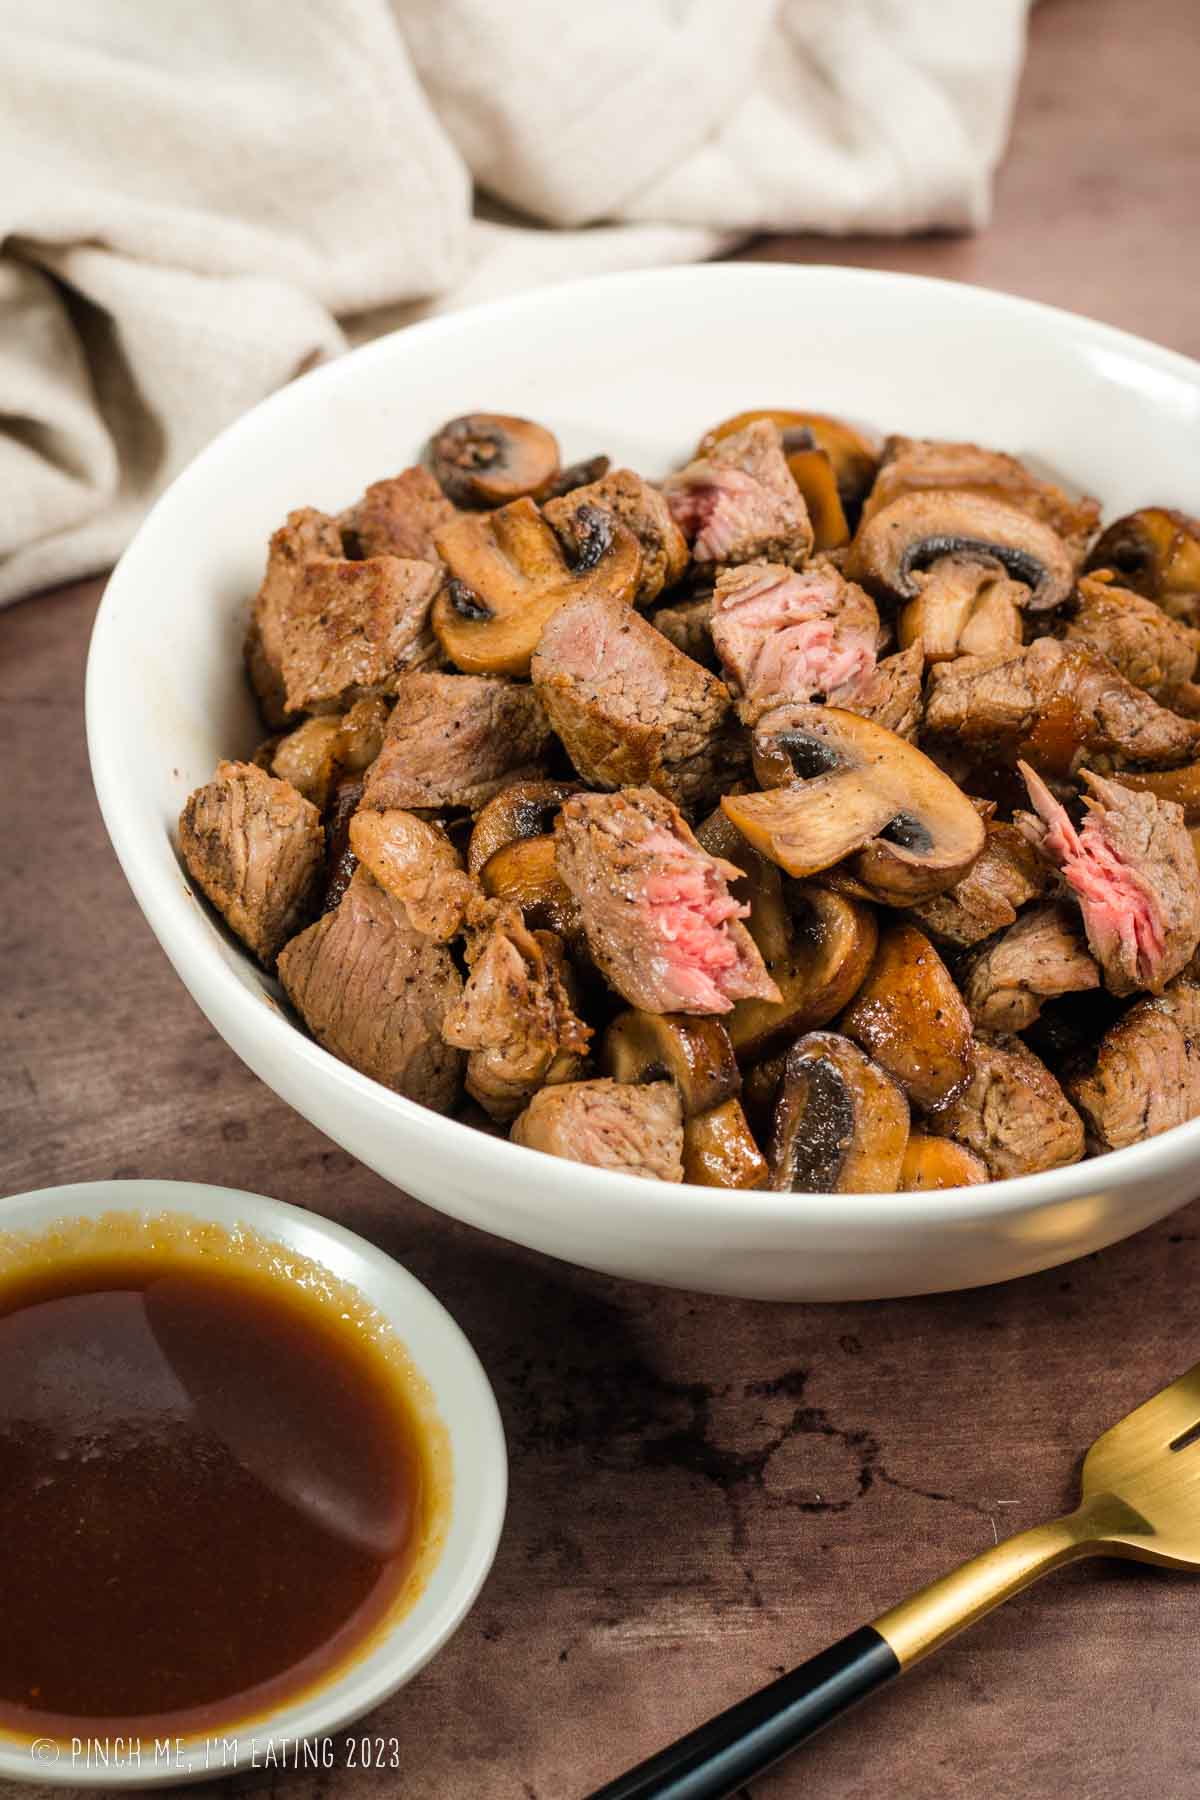 Easy Hibachi Steak At Home (Japanese Steakhouse Style)